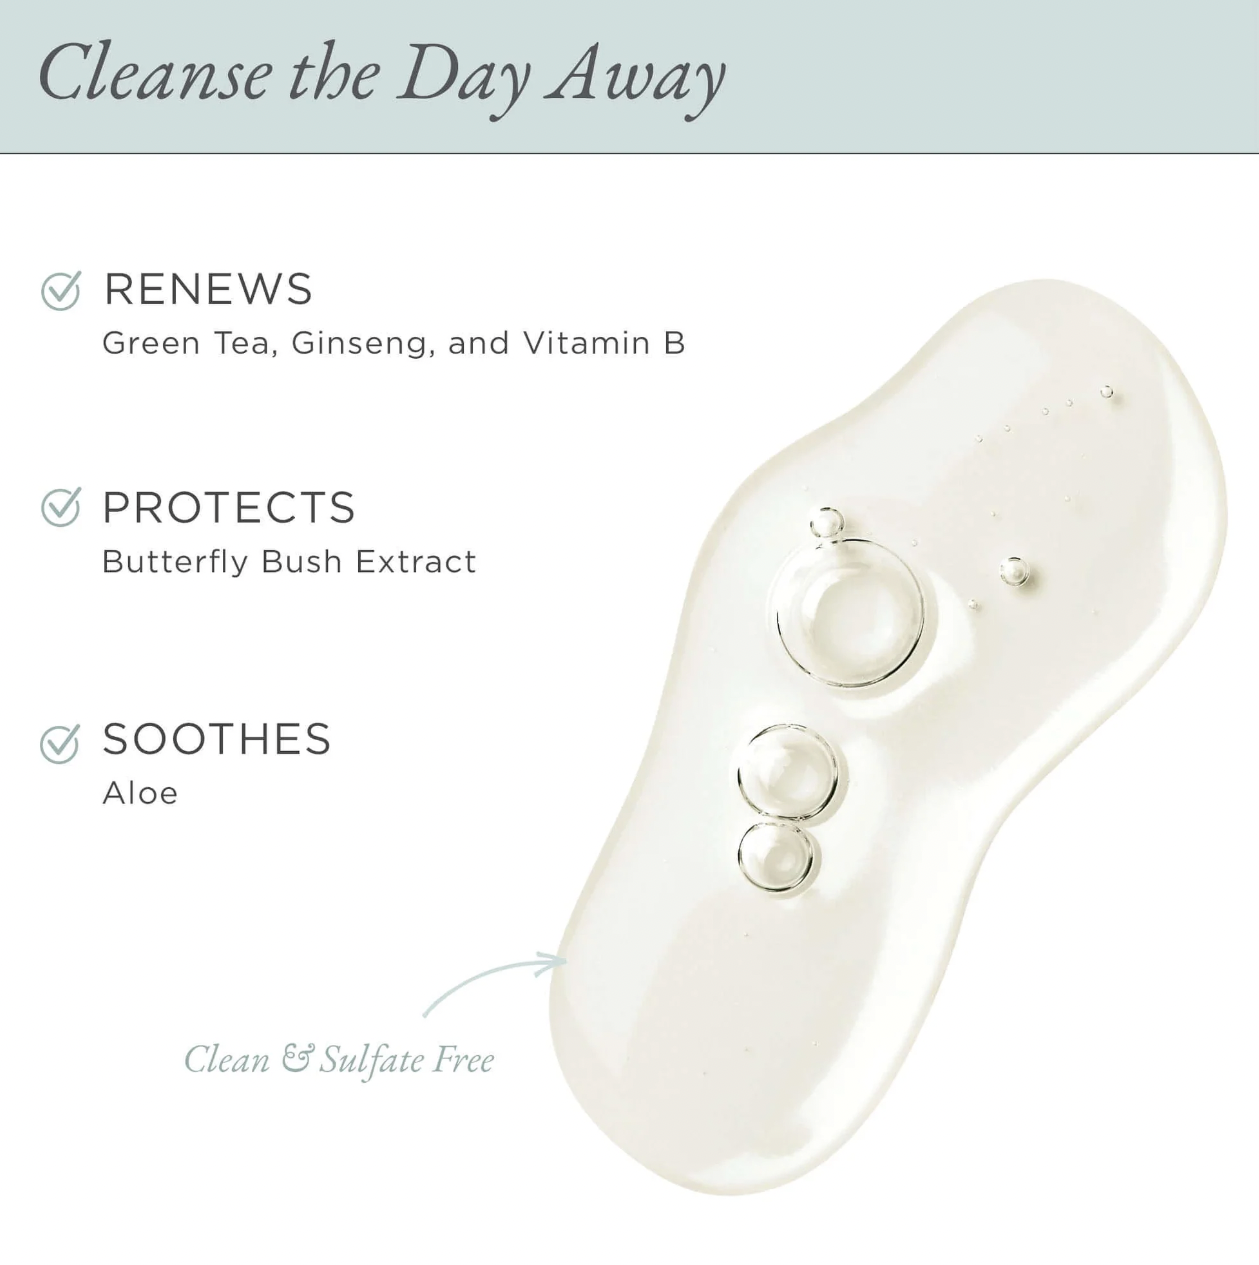 PUR Forever clean gentle cleanser